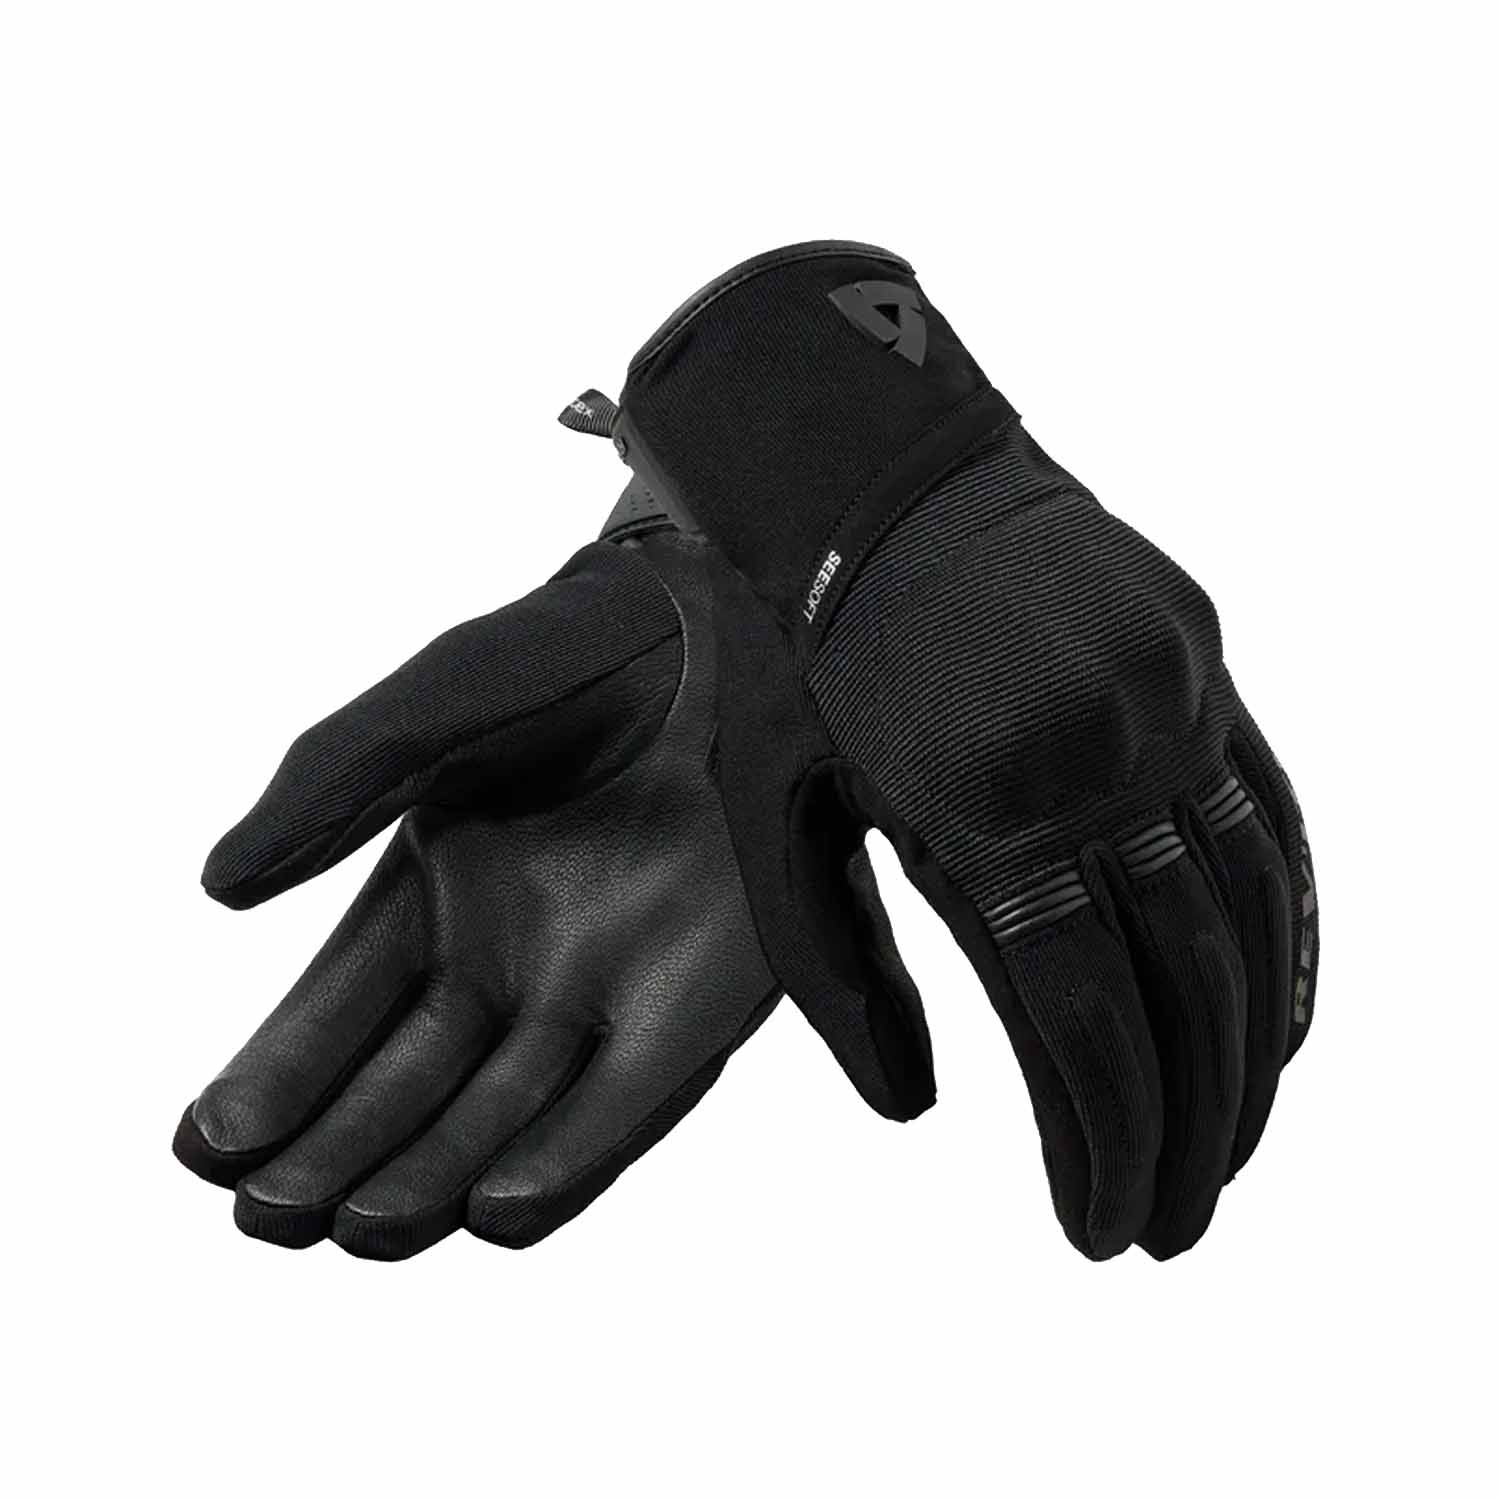 Image of EU REV'IT! Mosca 2 Ladies Gloves Black Taille M